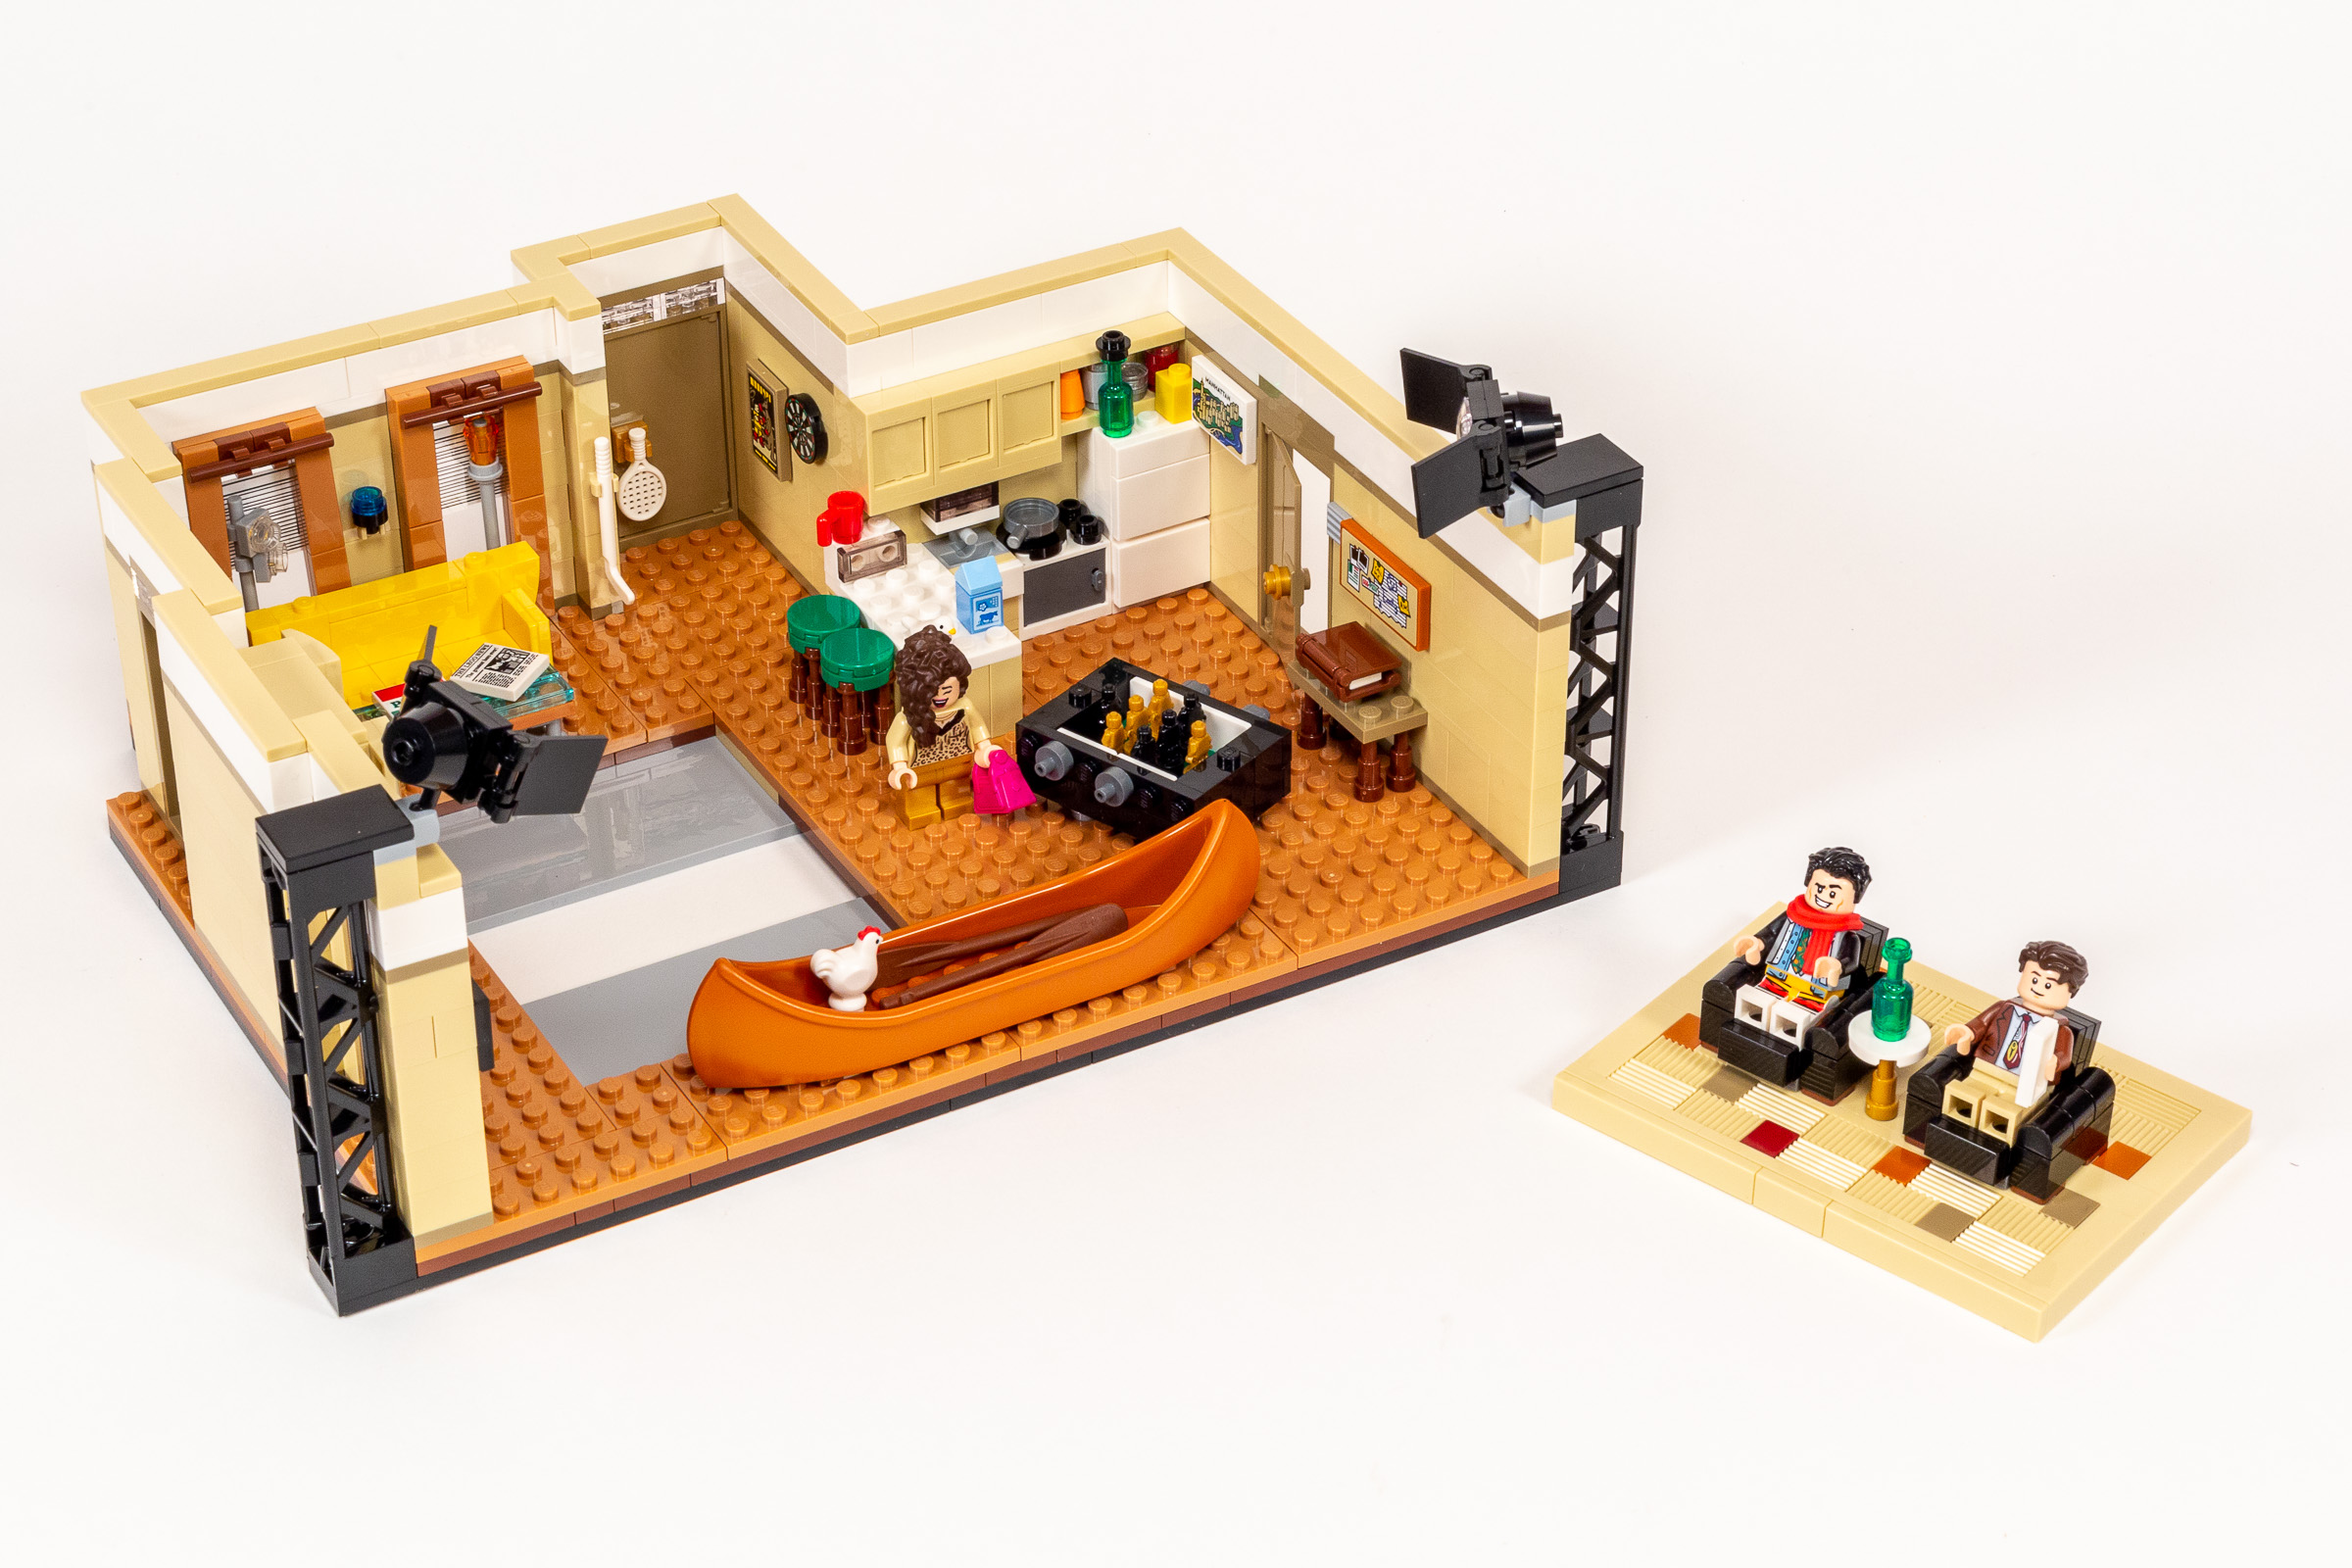 LEGO unveils 2,048-piece FRIENDS set recreating joey and monica's apartments